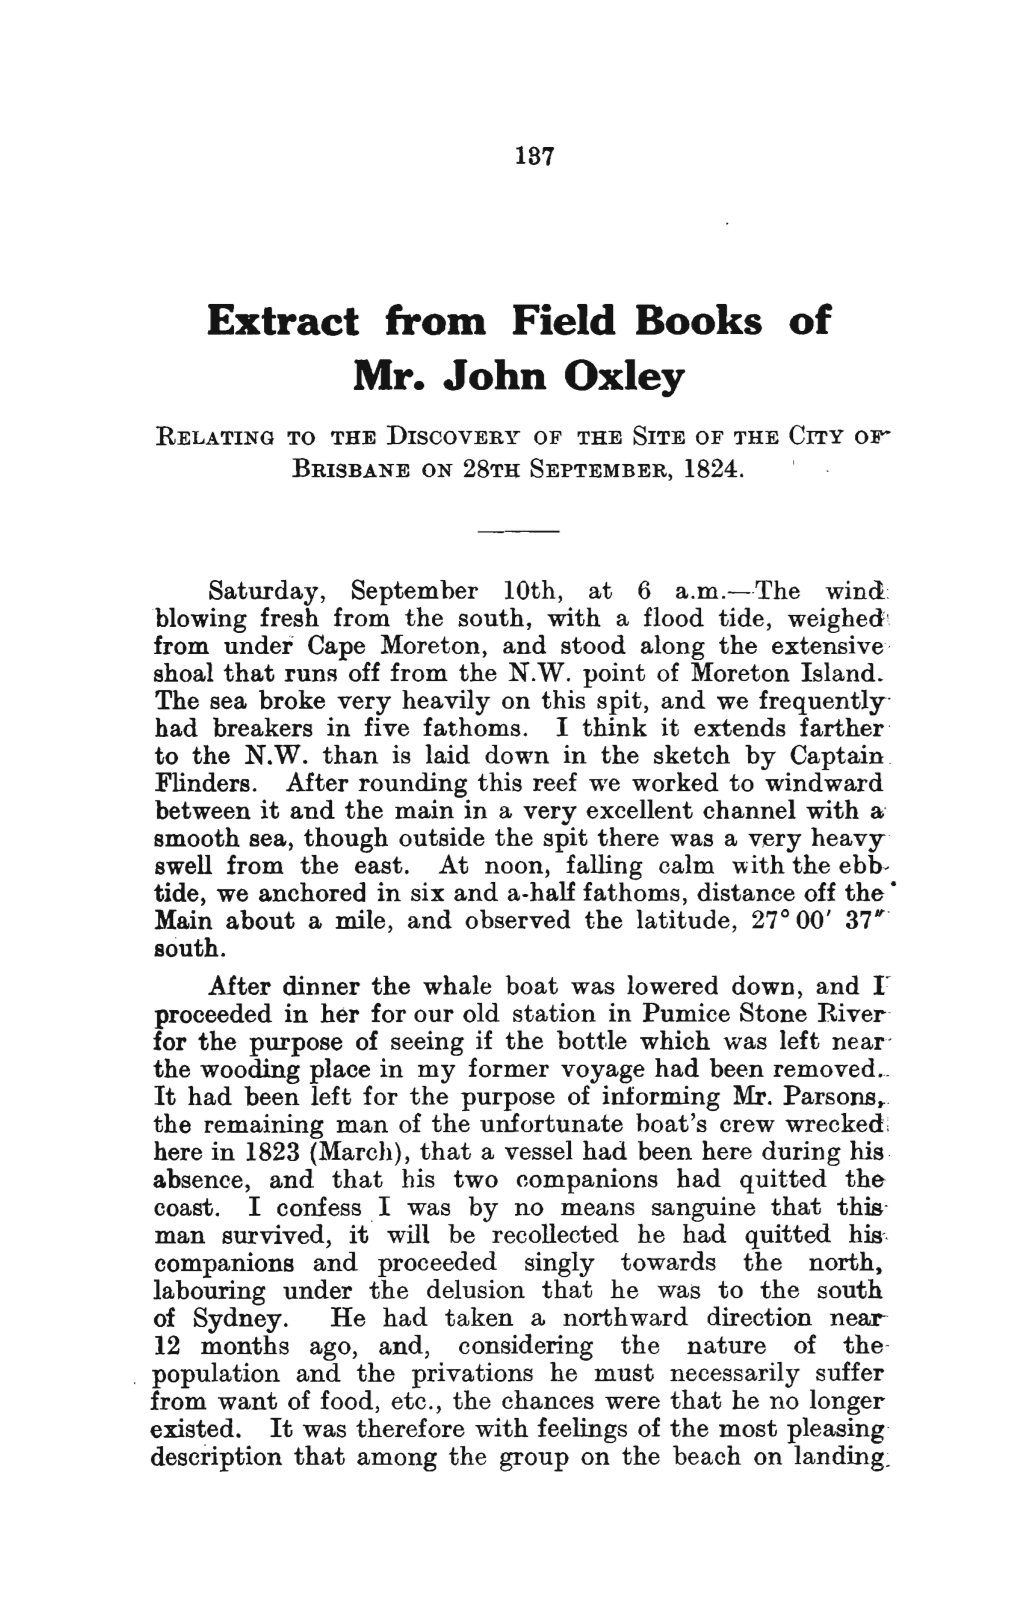 Extract from Field Books of Mr. John Oxley